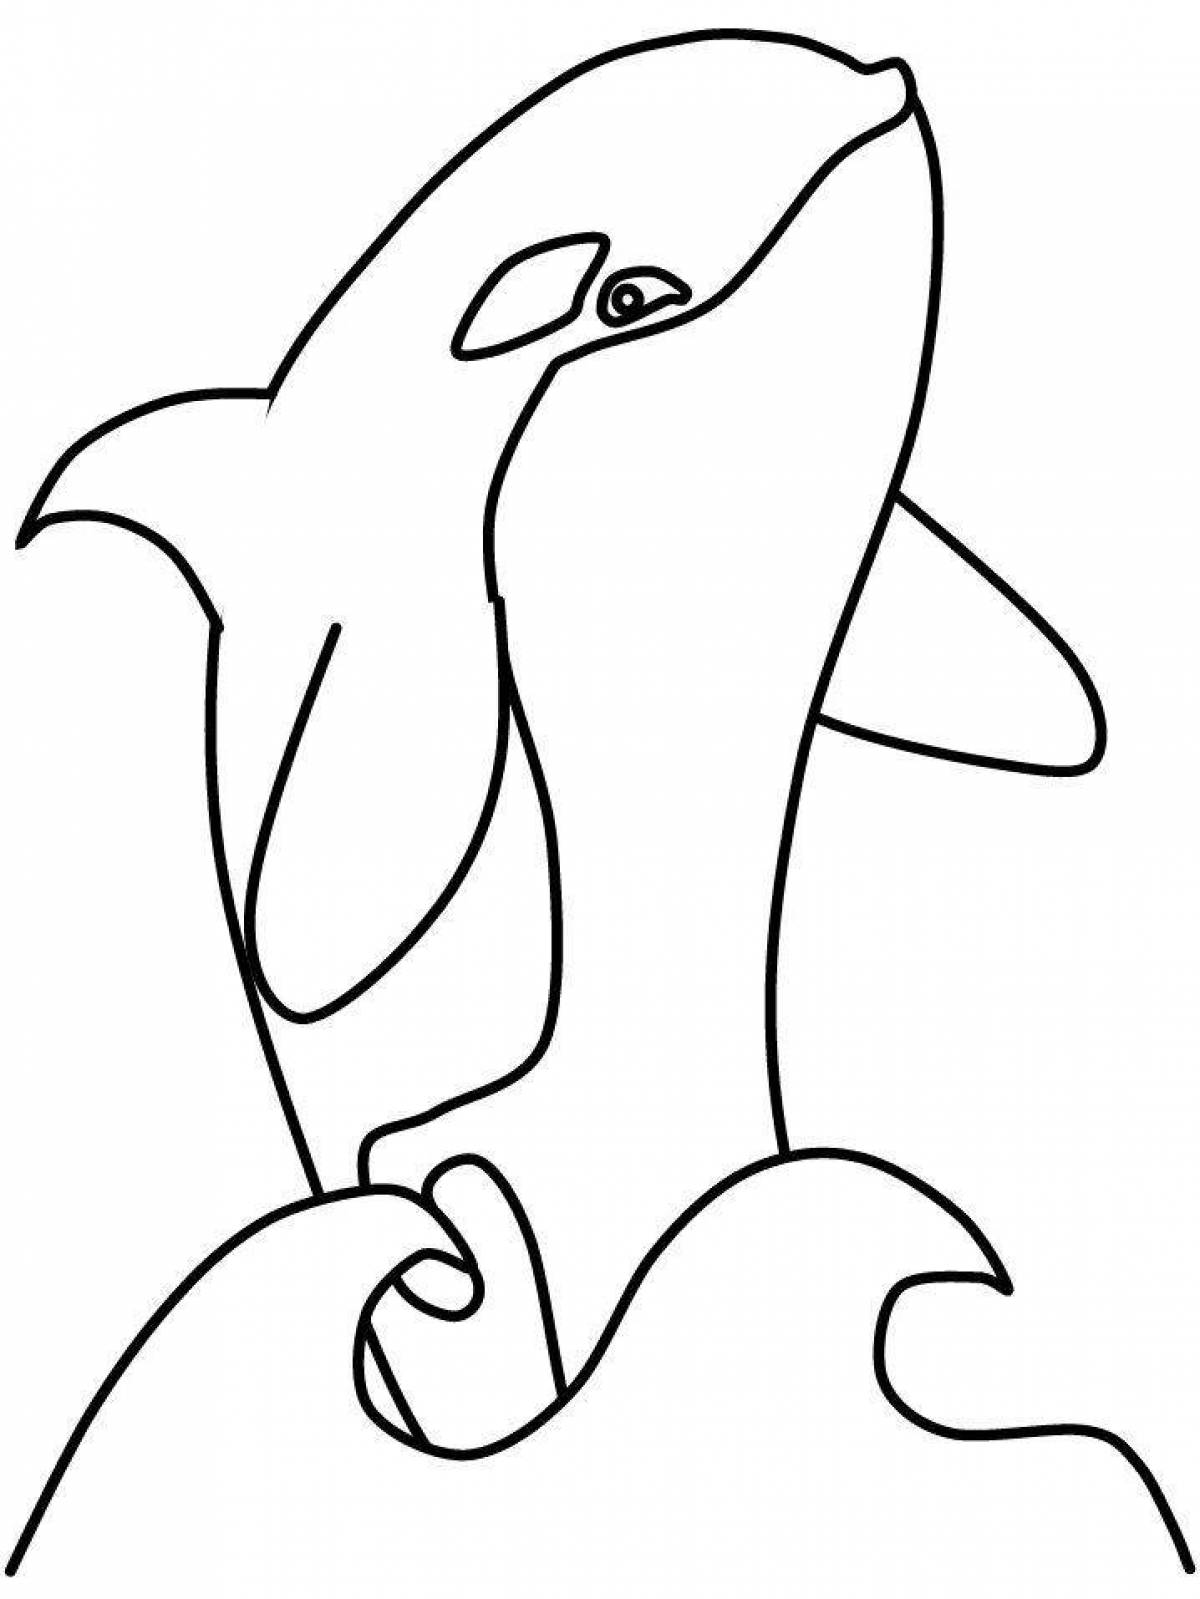 Colorful killer whale coloring page for kids